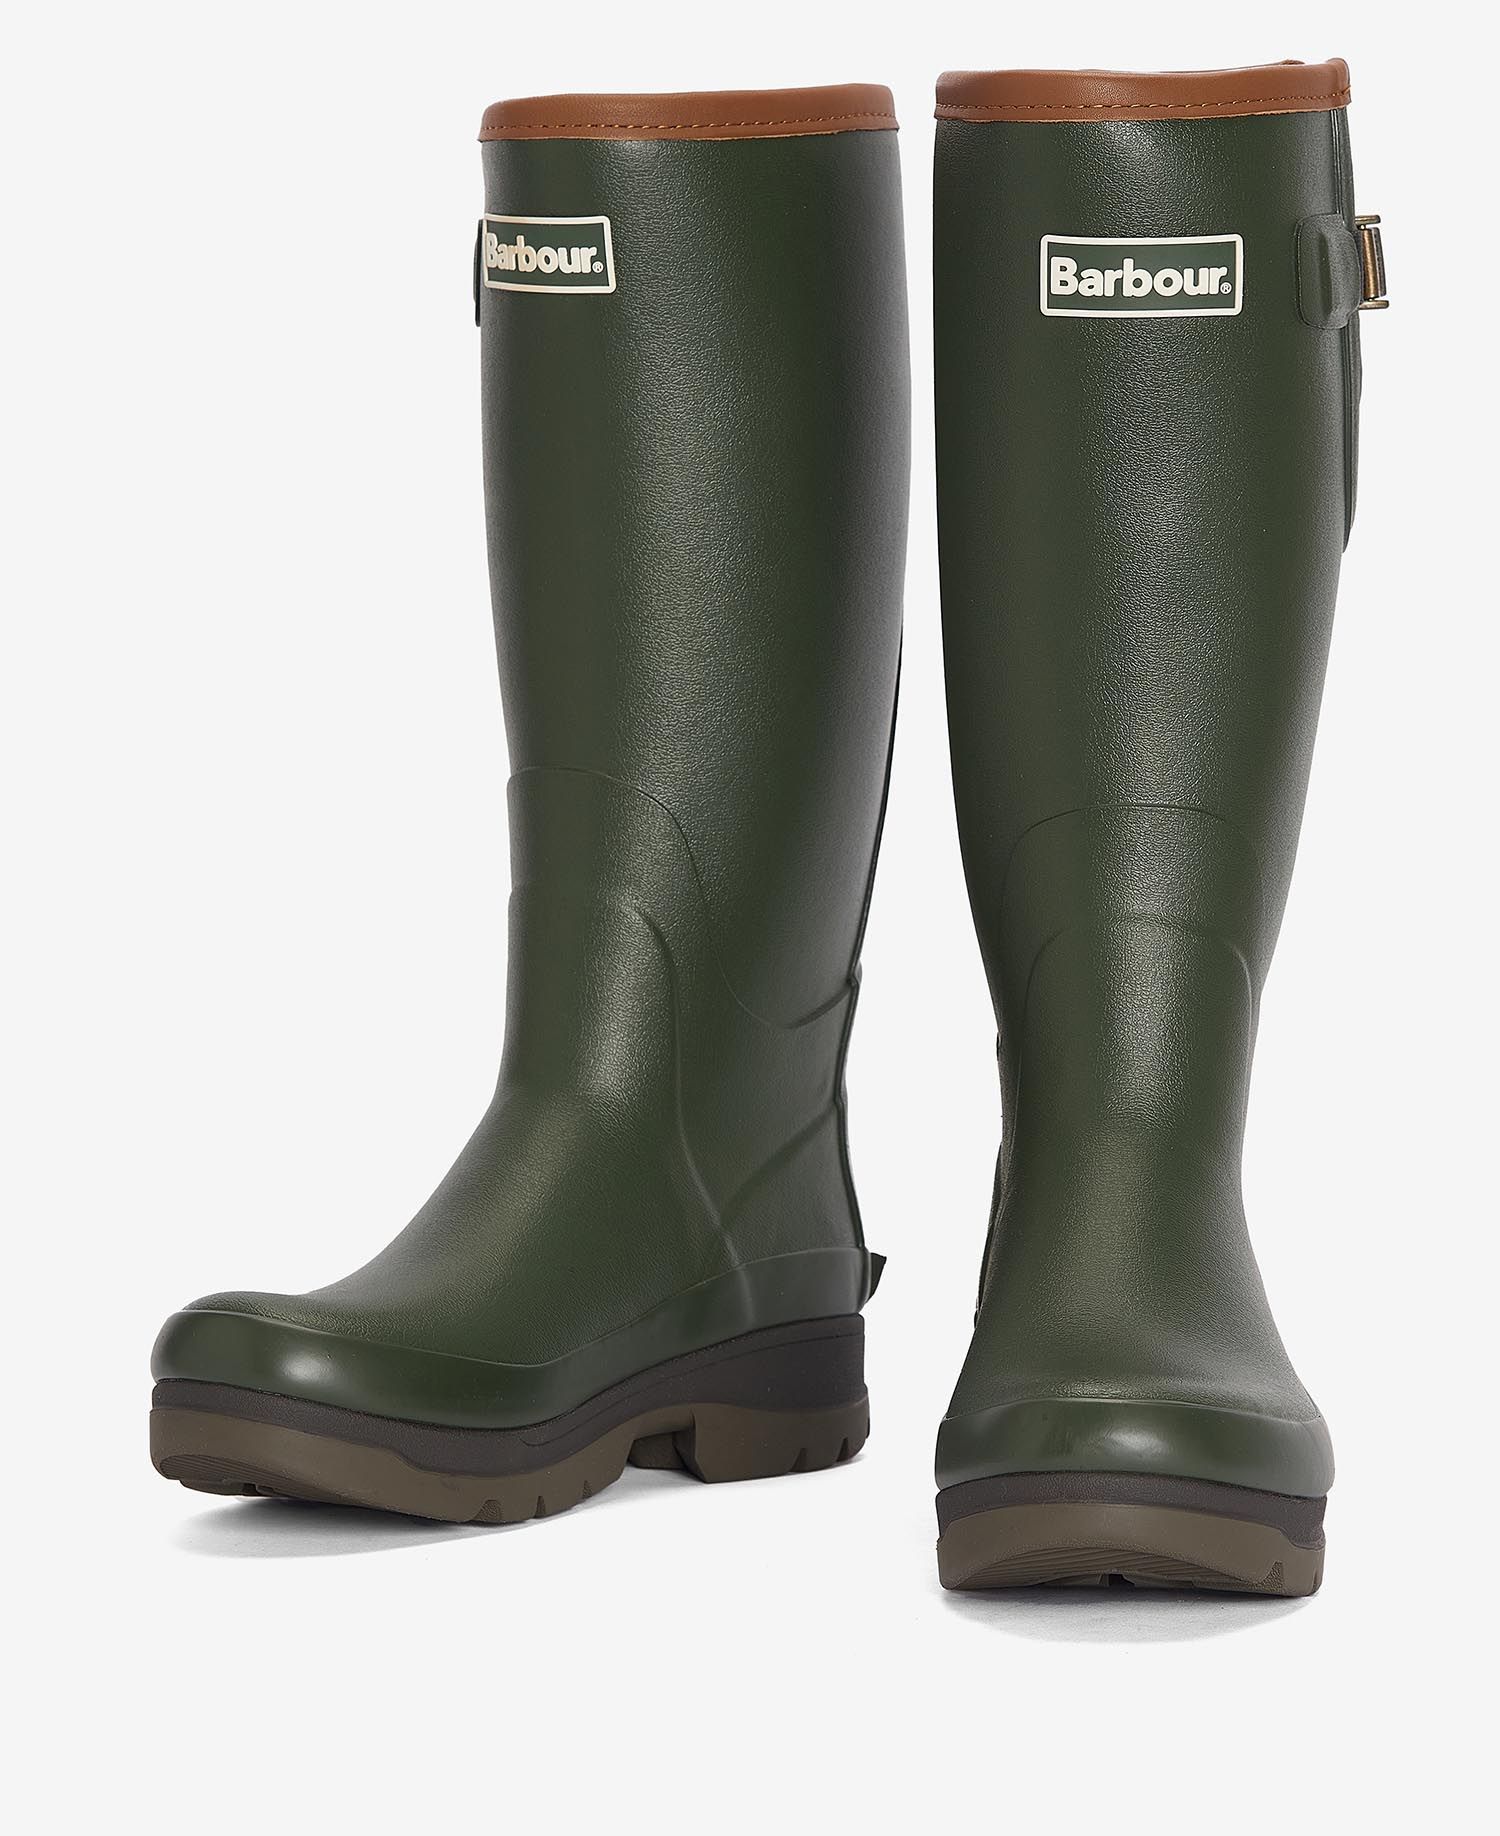 Barbour Womens Tempest Wellingtons in Olive | Barbour International